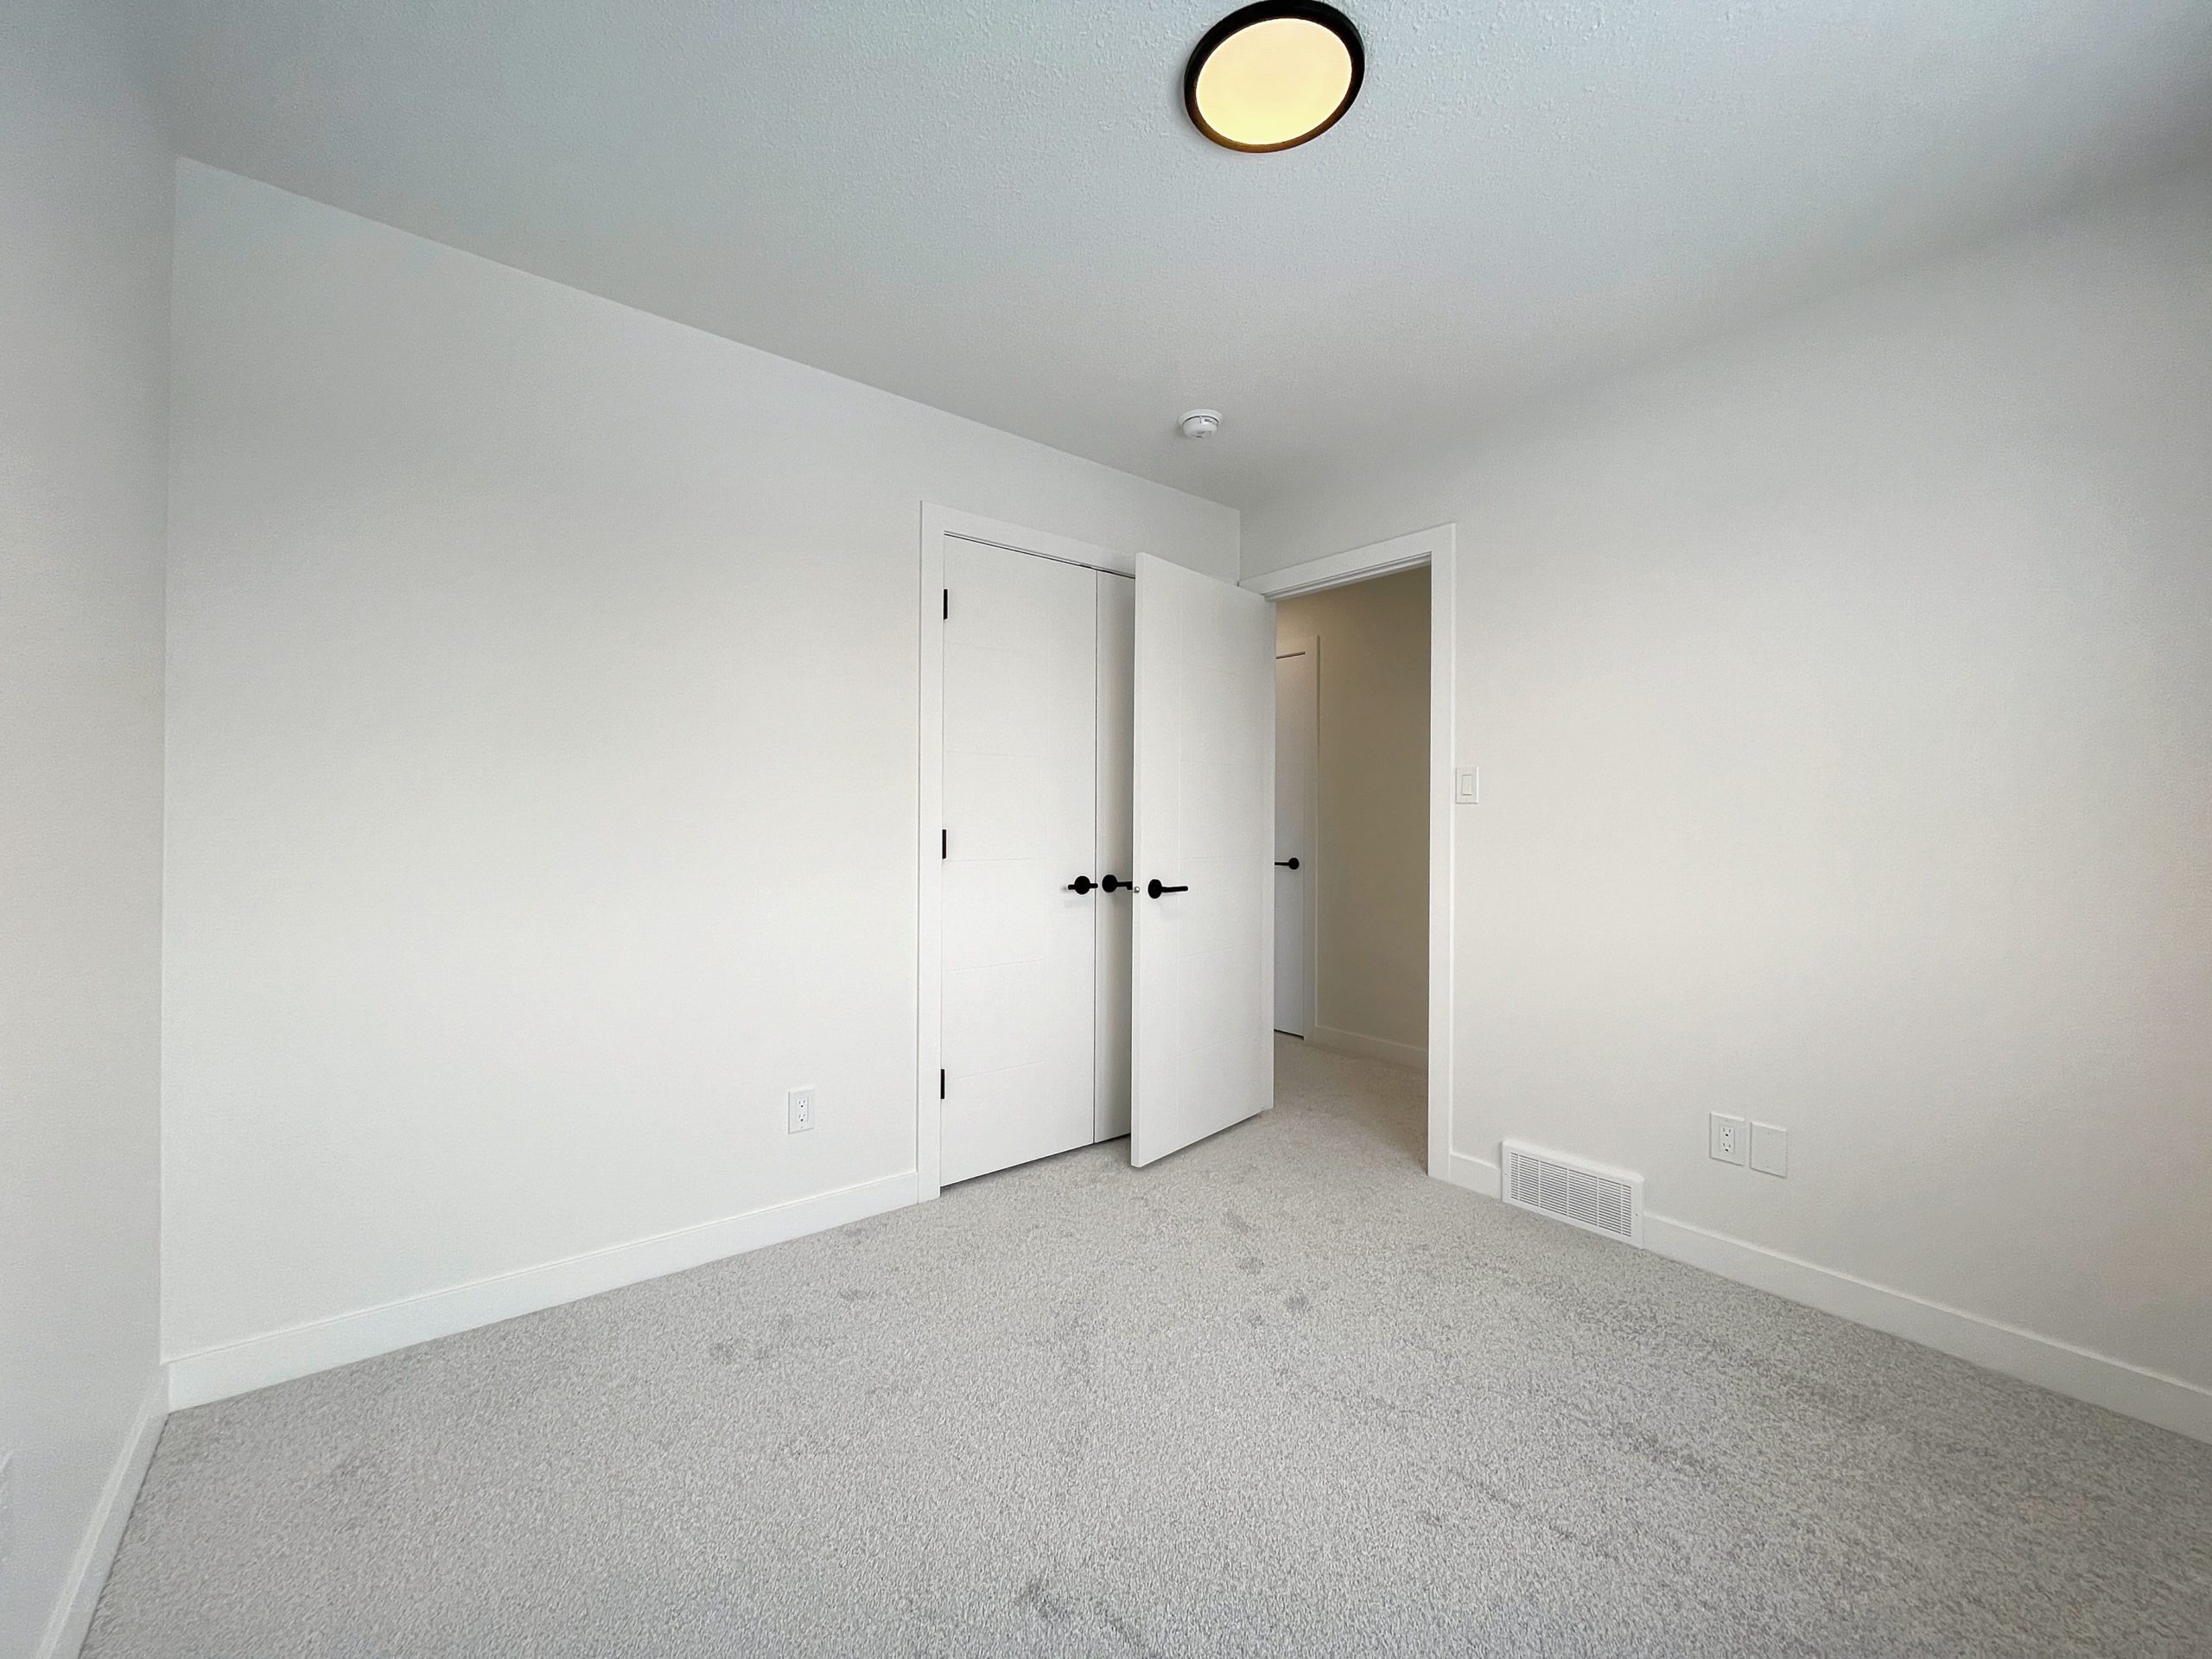 An empty bedroom with white walls and doors.